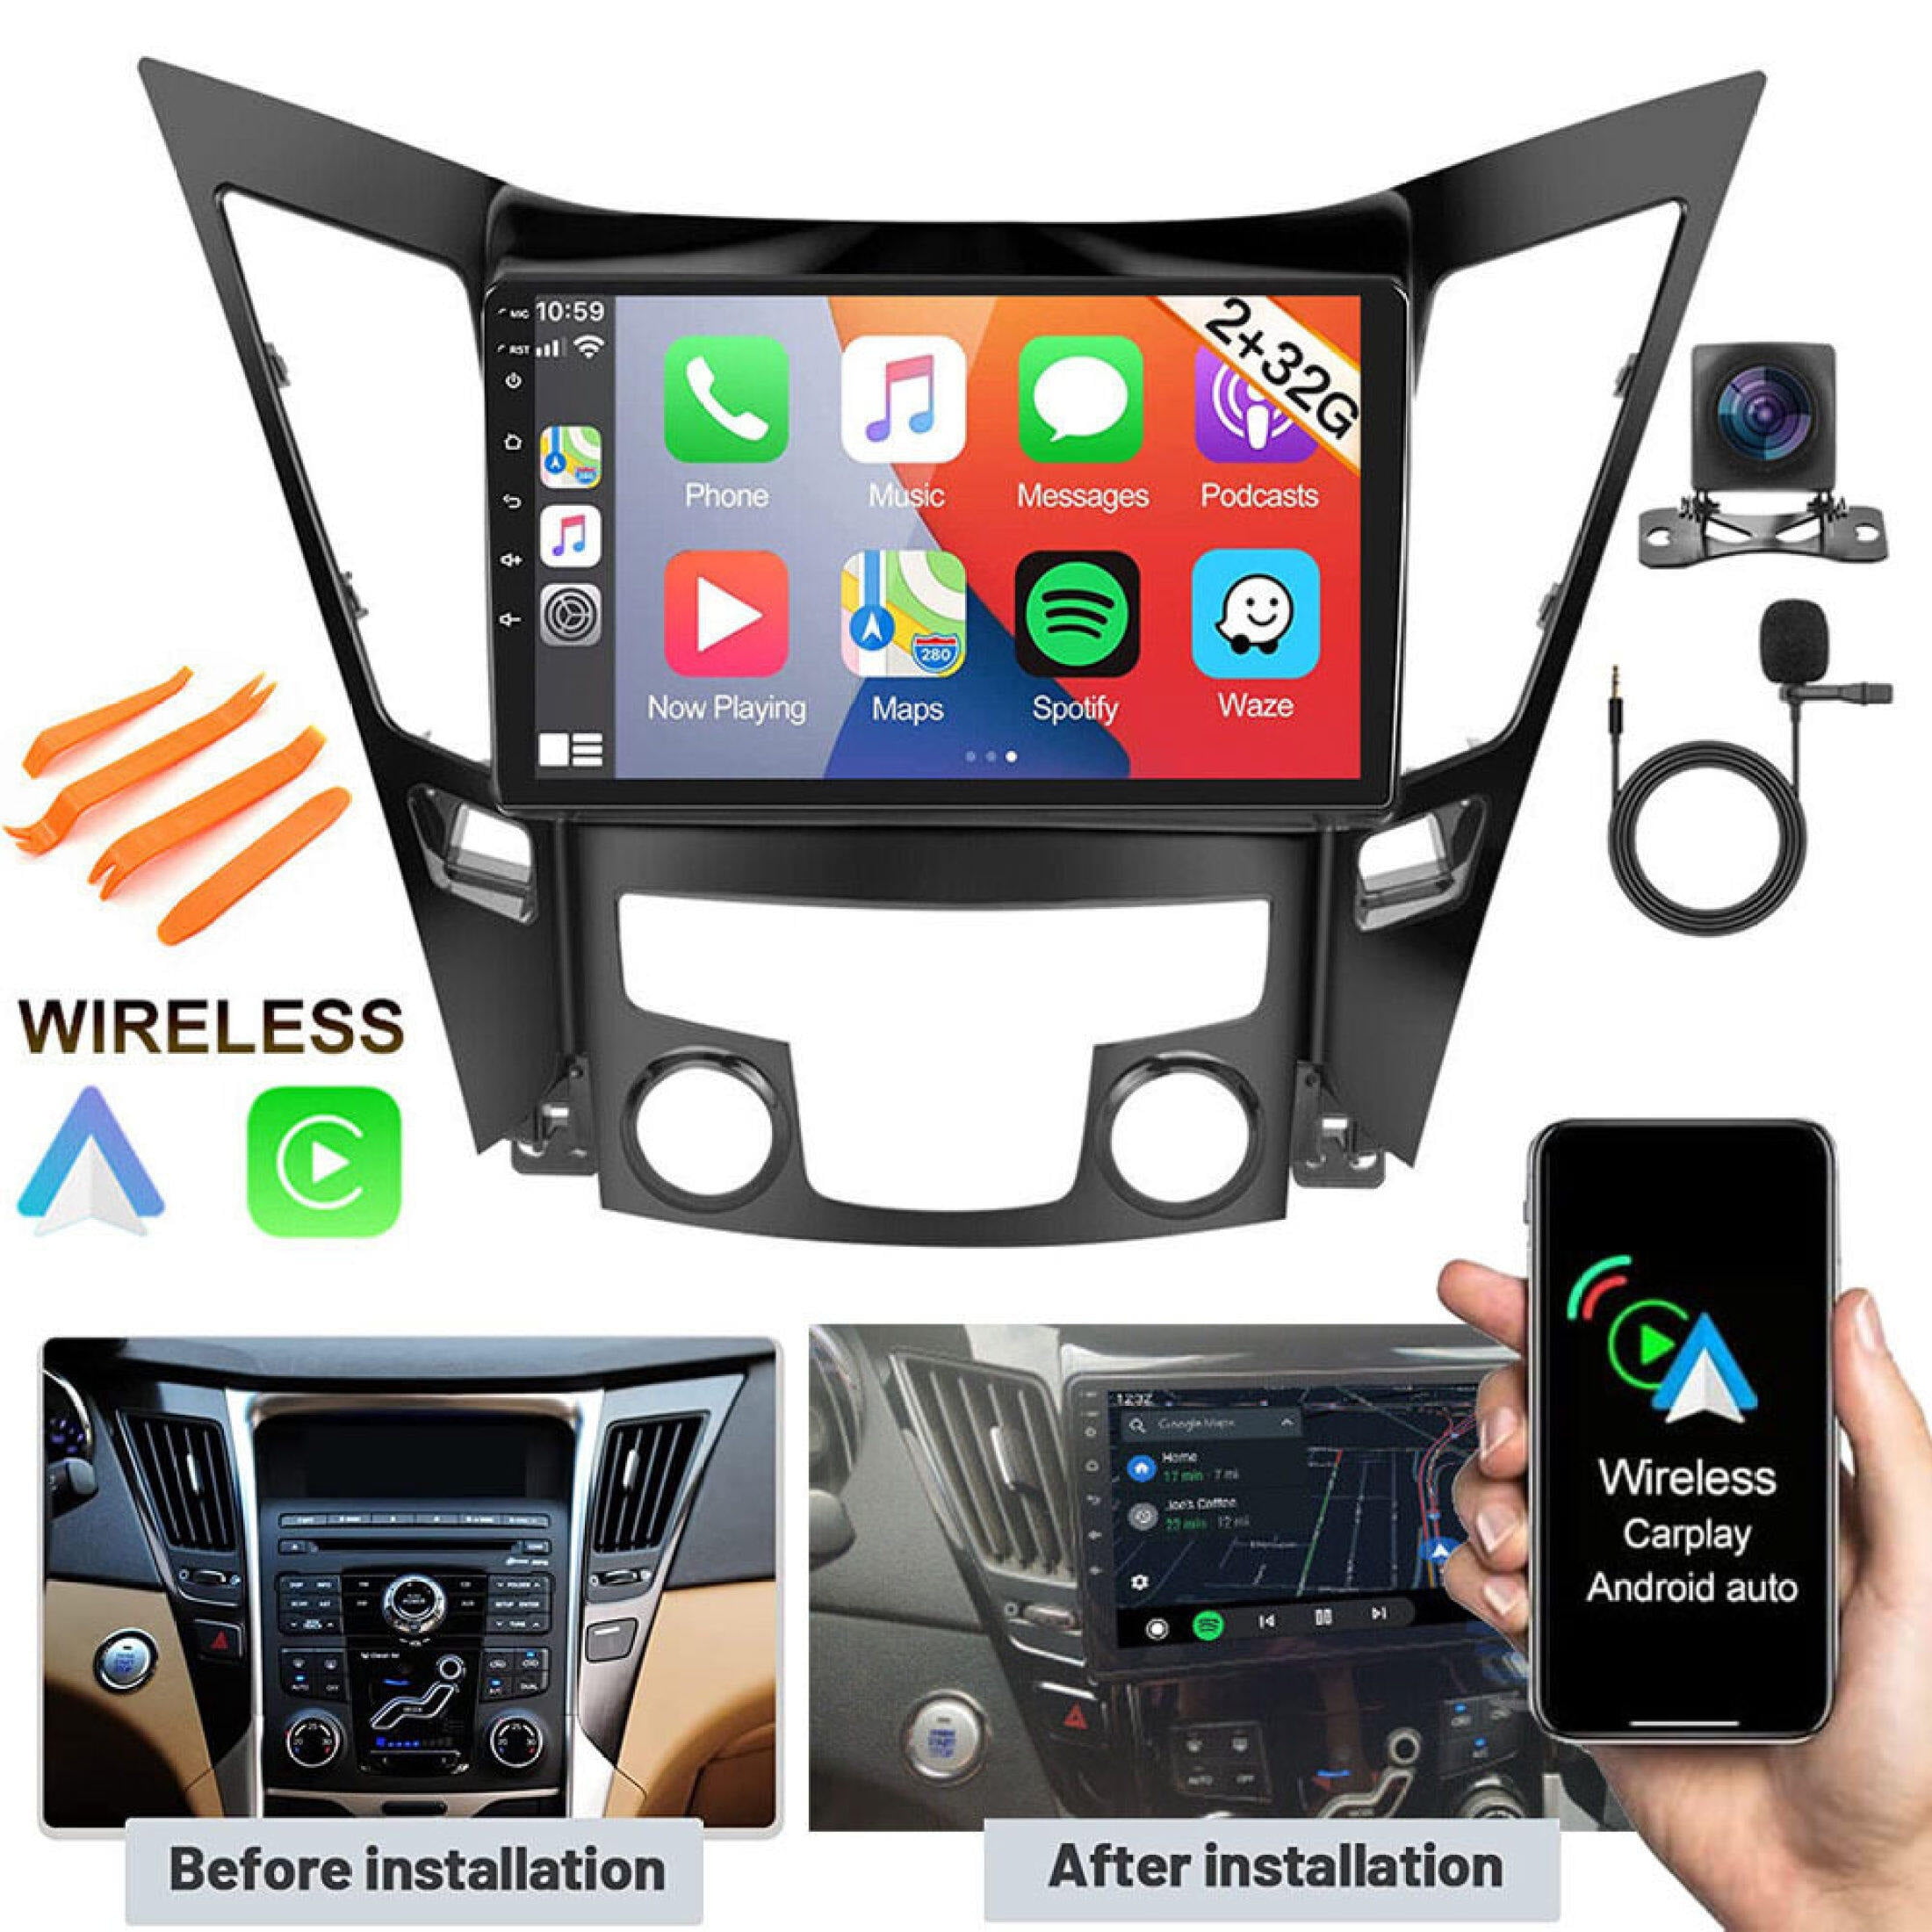 Zcargel Android 12 Car Stereo for Hyundai Sonata 2010-2015 with